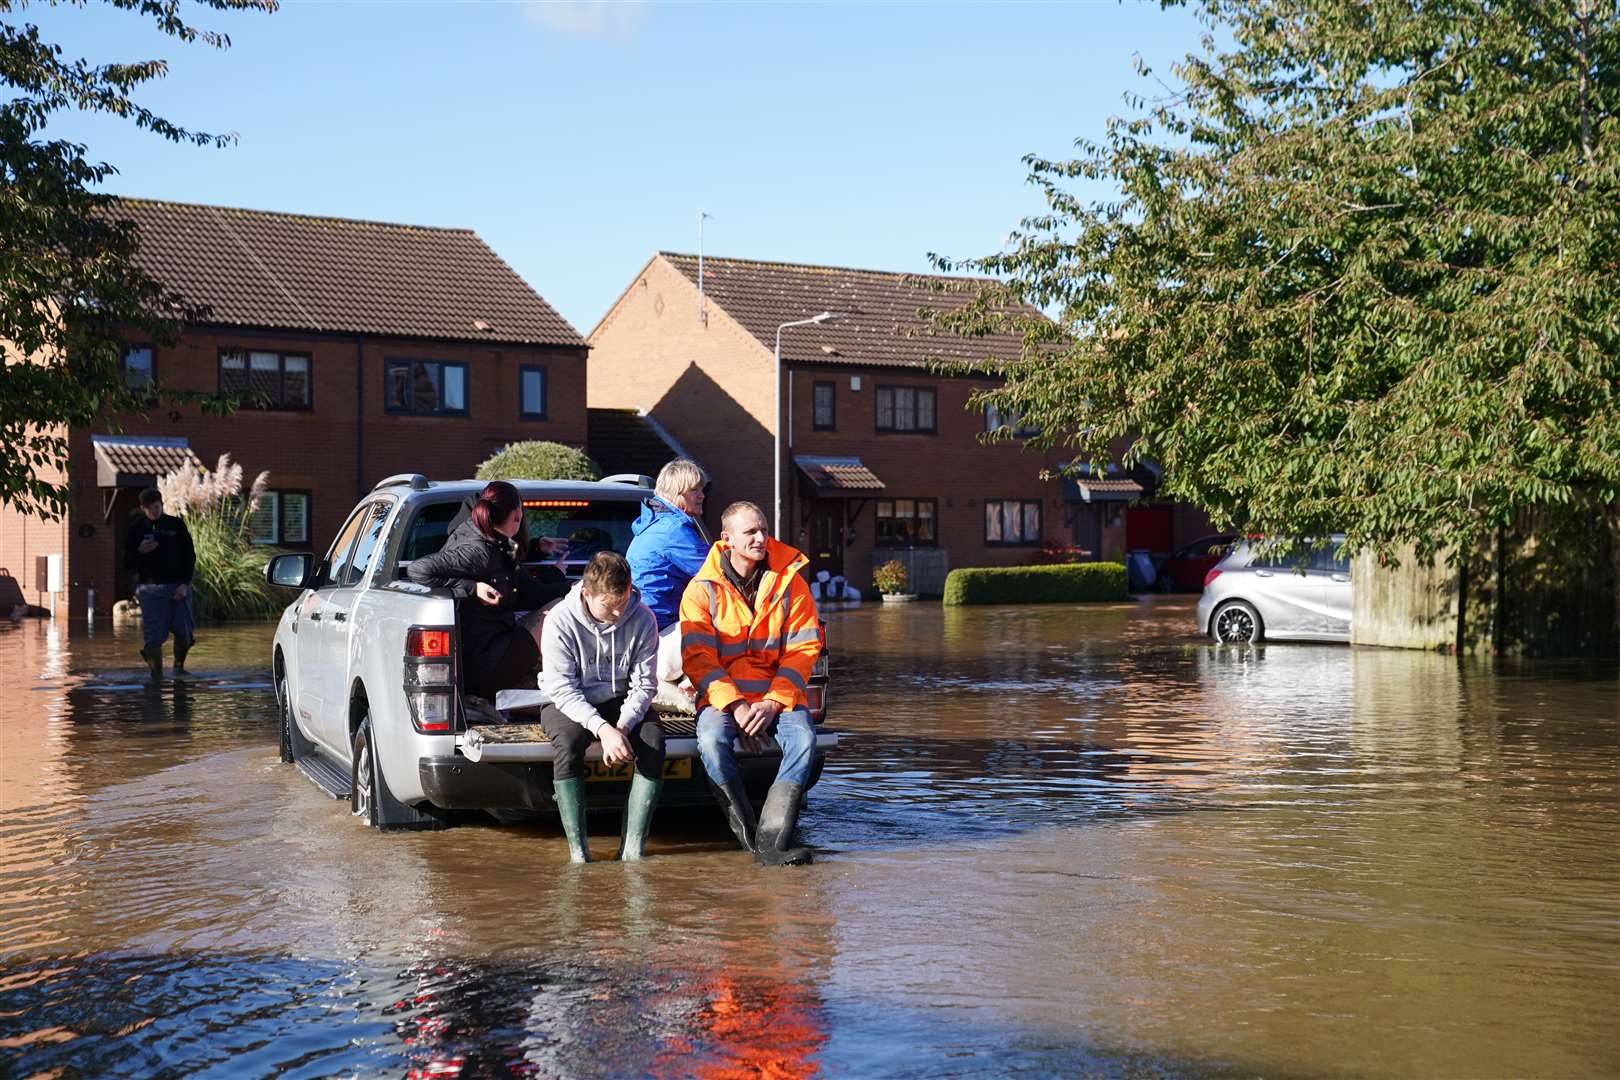 There is flooding in areas of Retford in Nottinghamshire (Joe Giddens/PA)